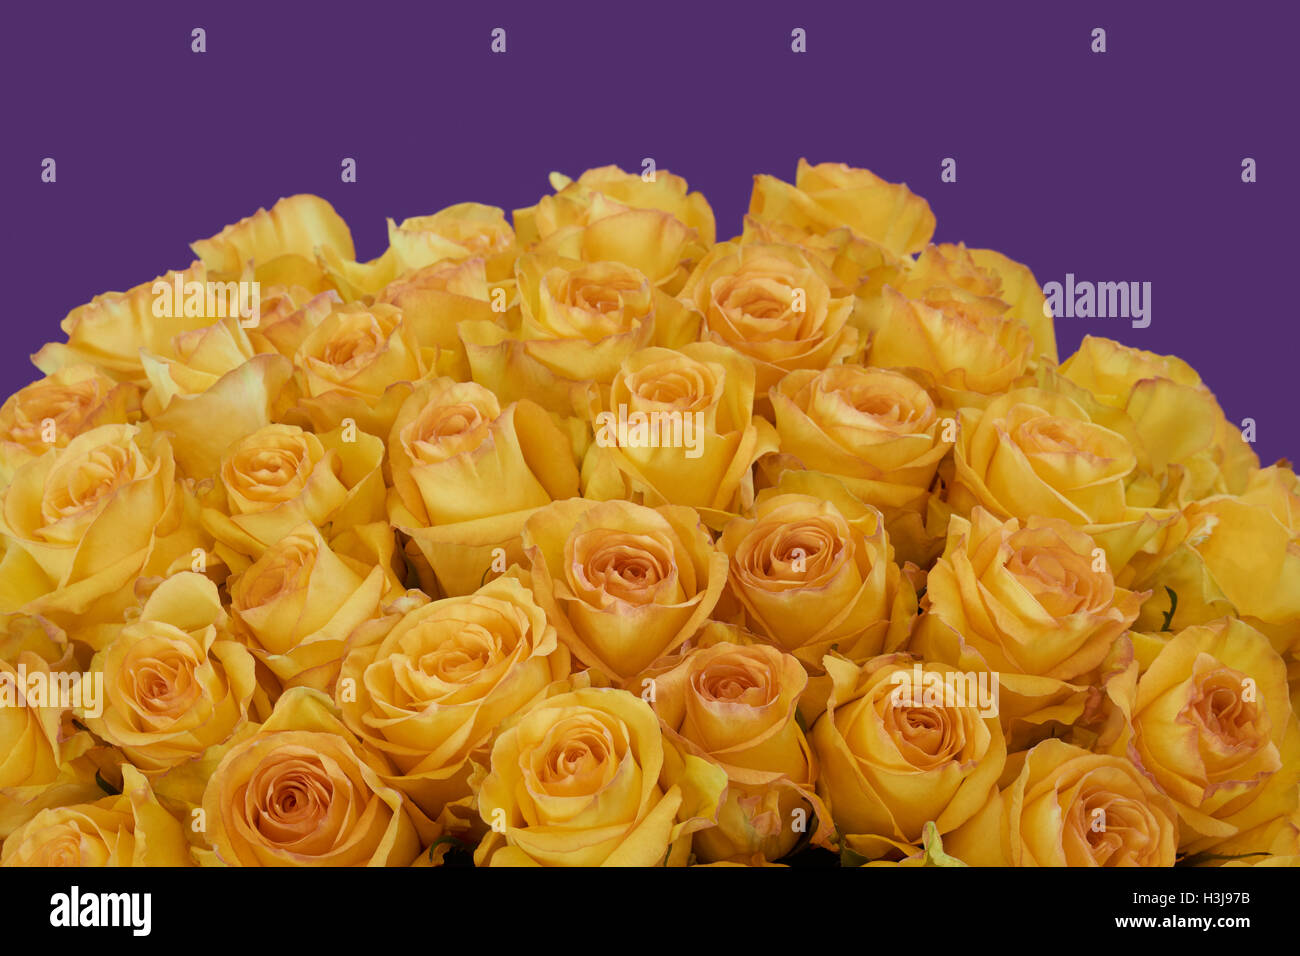 Bunch of beautiful yellow roses on violet background Stock Photo